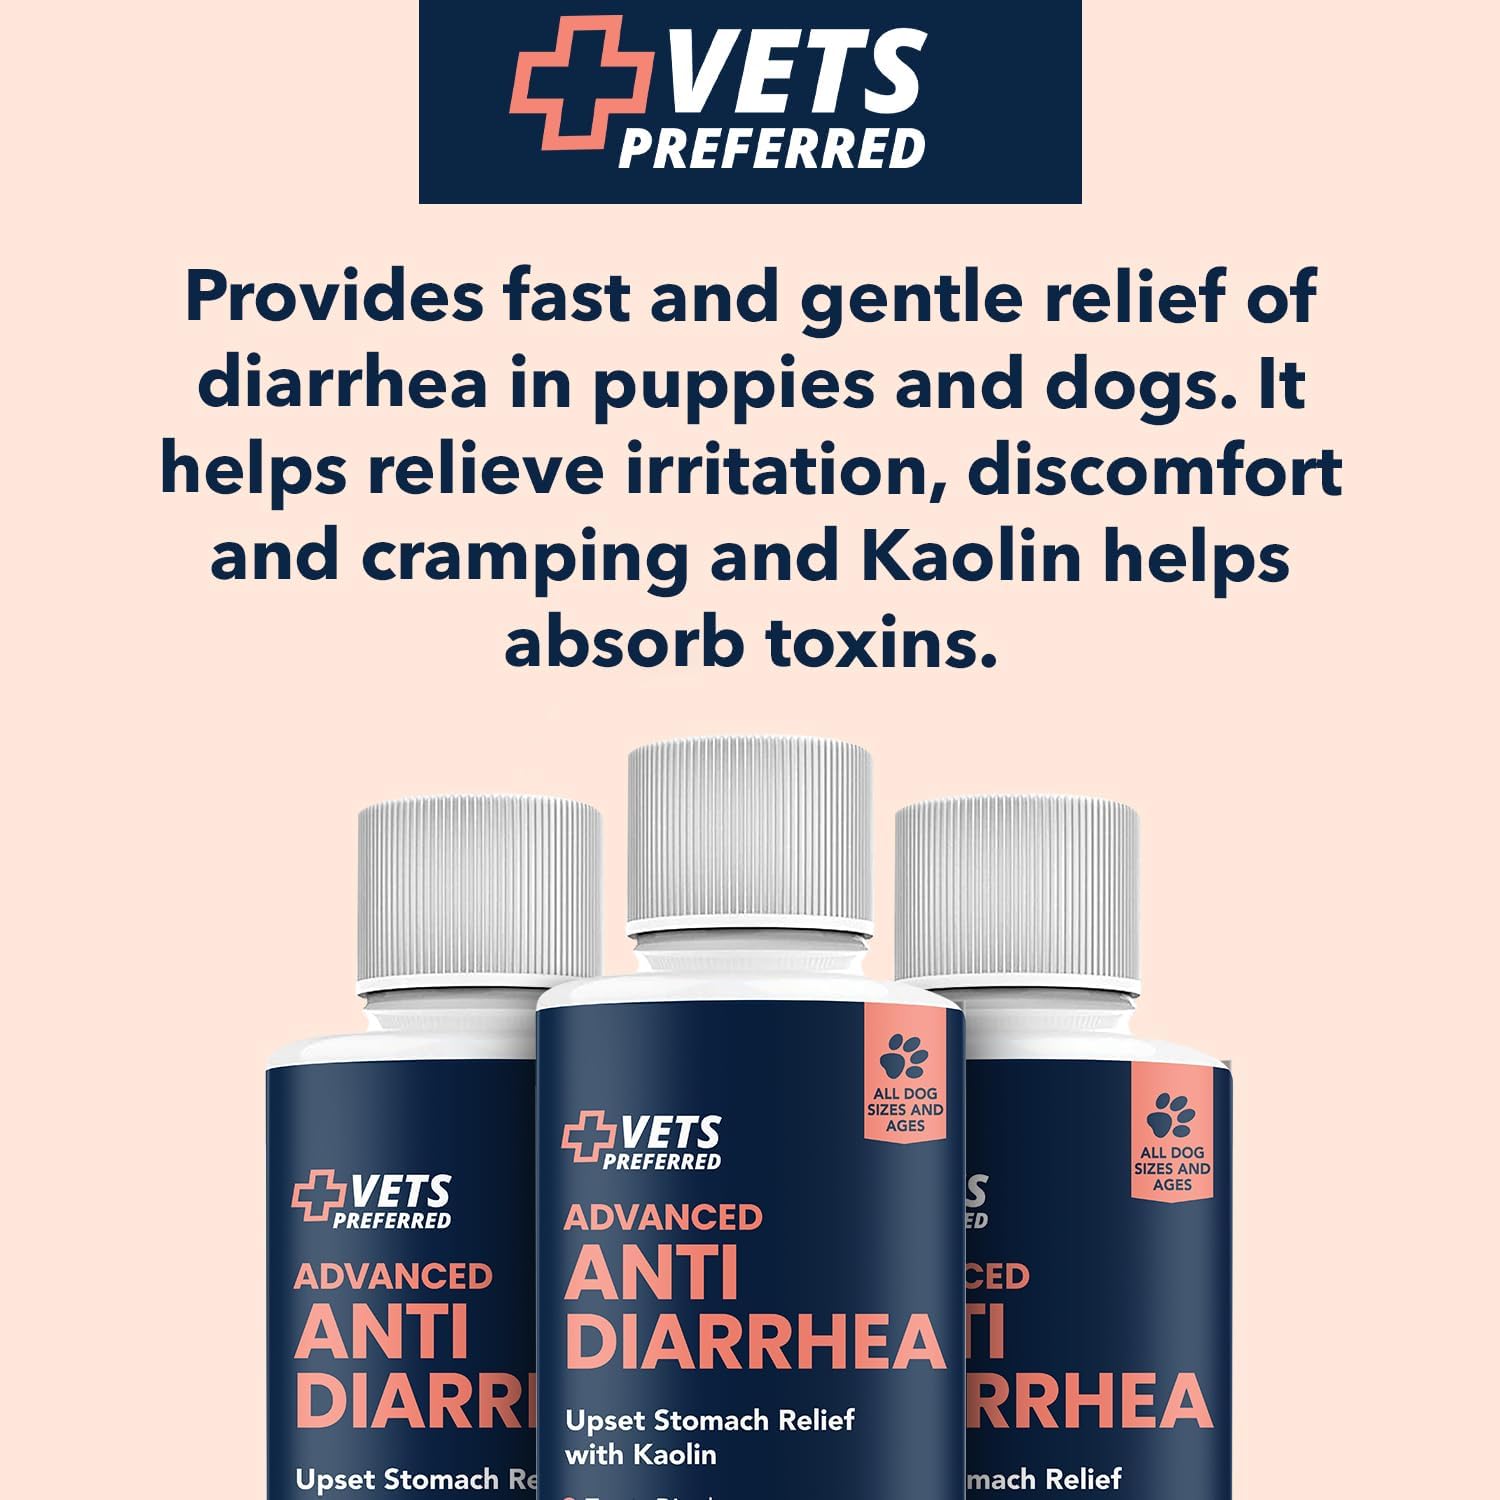 Vets Preferred Anti Diarrhea Liquid for Dogs - Dog Diarrhea Relief with Kaolin (8 oz.) | Once Every 12 Hours for Dog Diarrhea & Dog Gas Relief : Pet Supplies